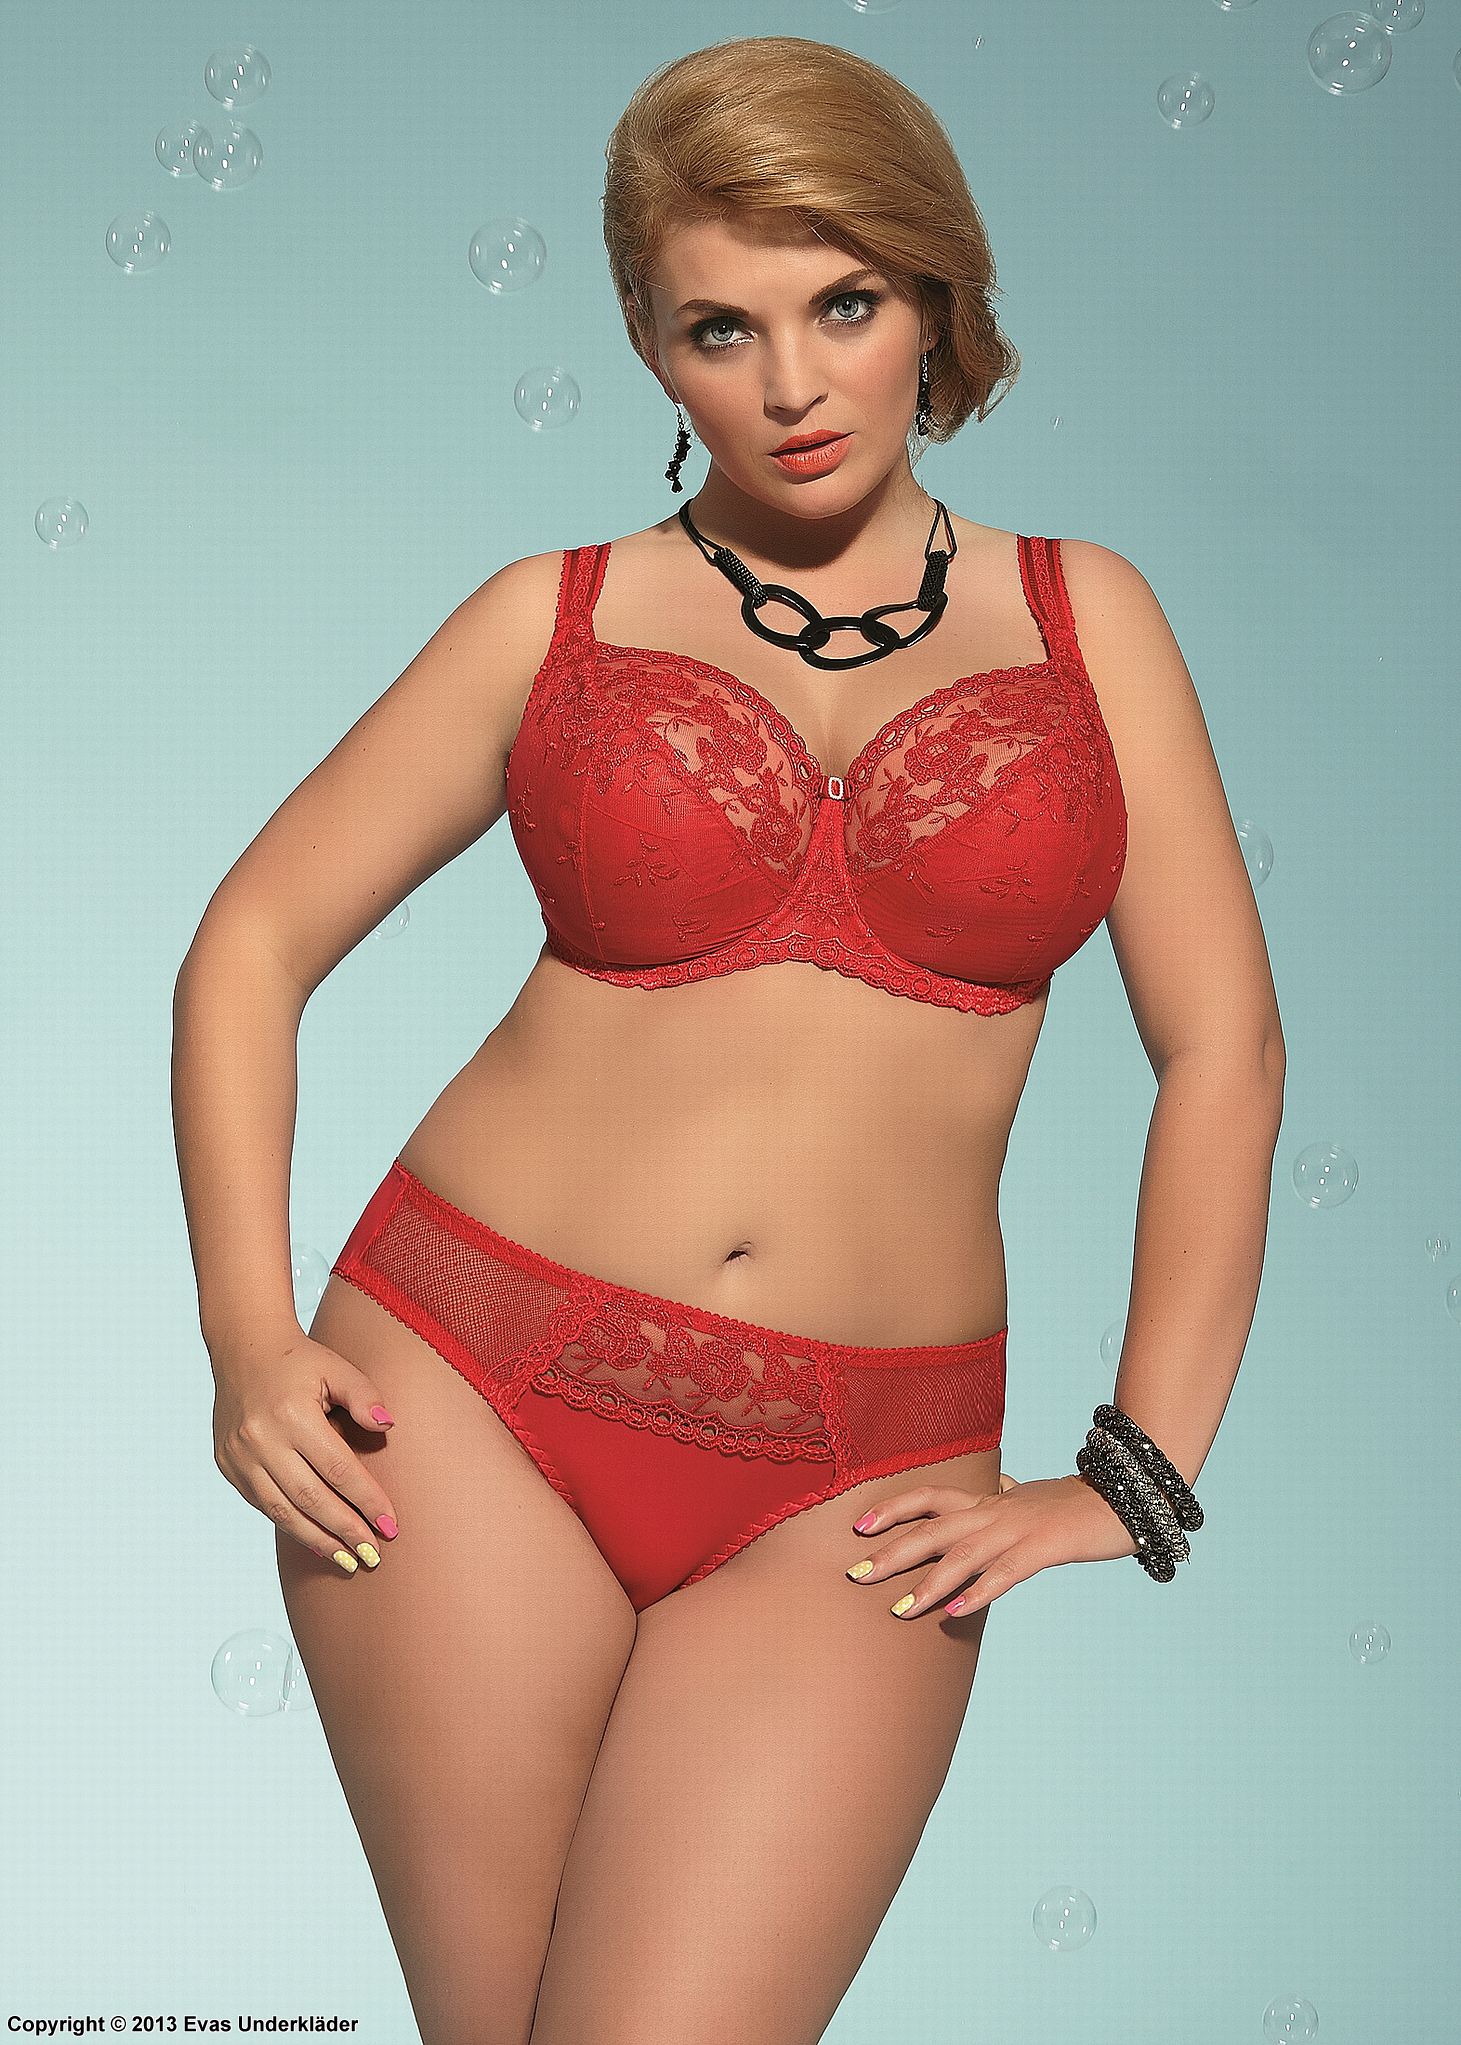 Classic briefs, sheer mesh, embroidery, subtle dotted pattern, plus size